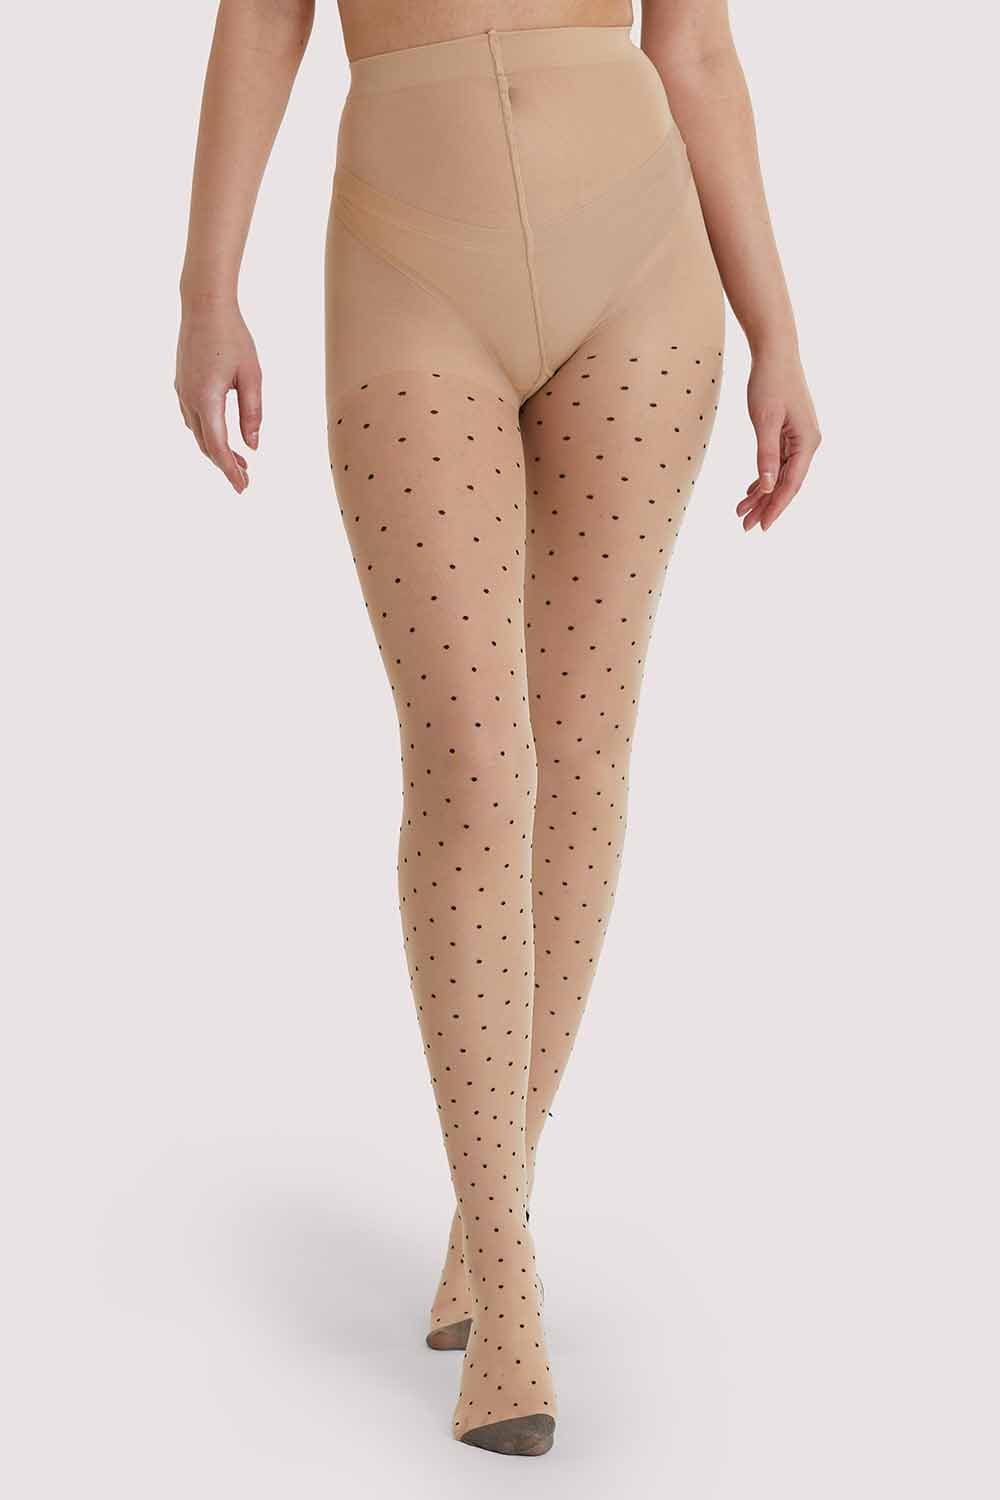 Dotty Seamed Tights With Bow Light Nude/Black US 4 - 18